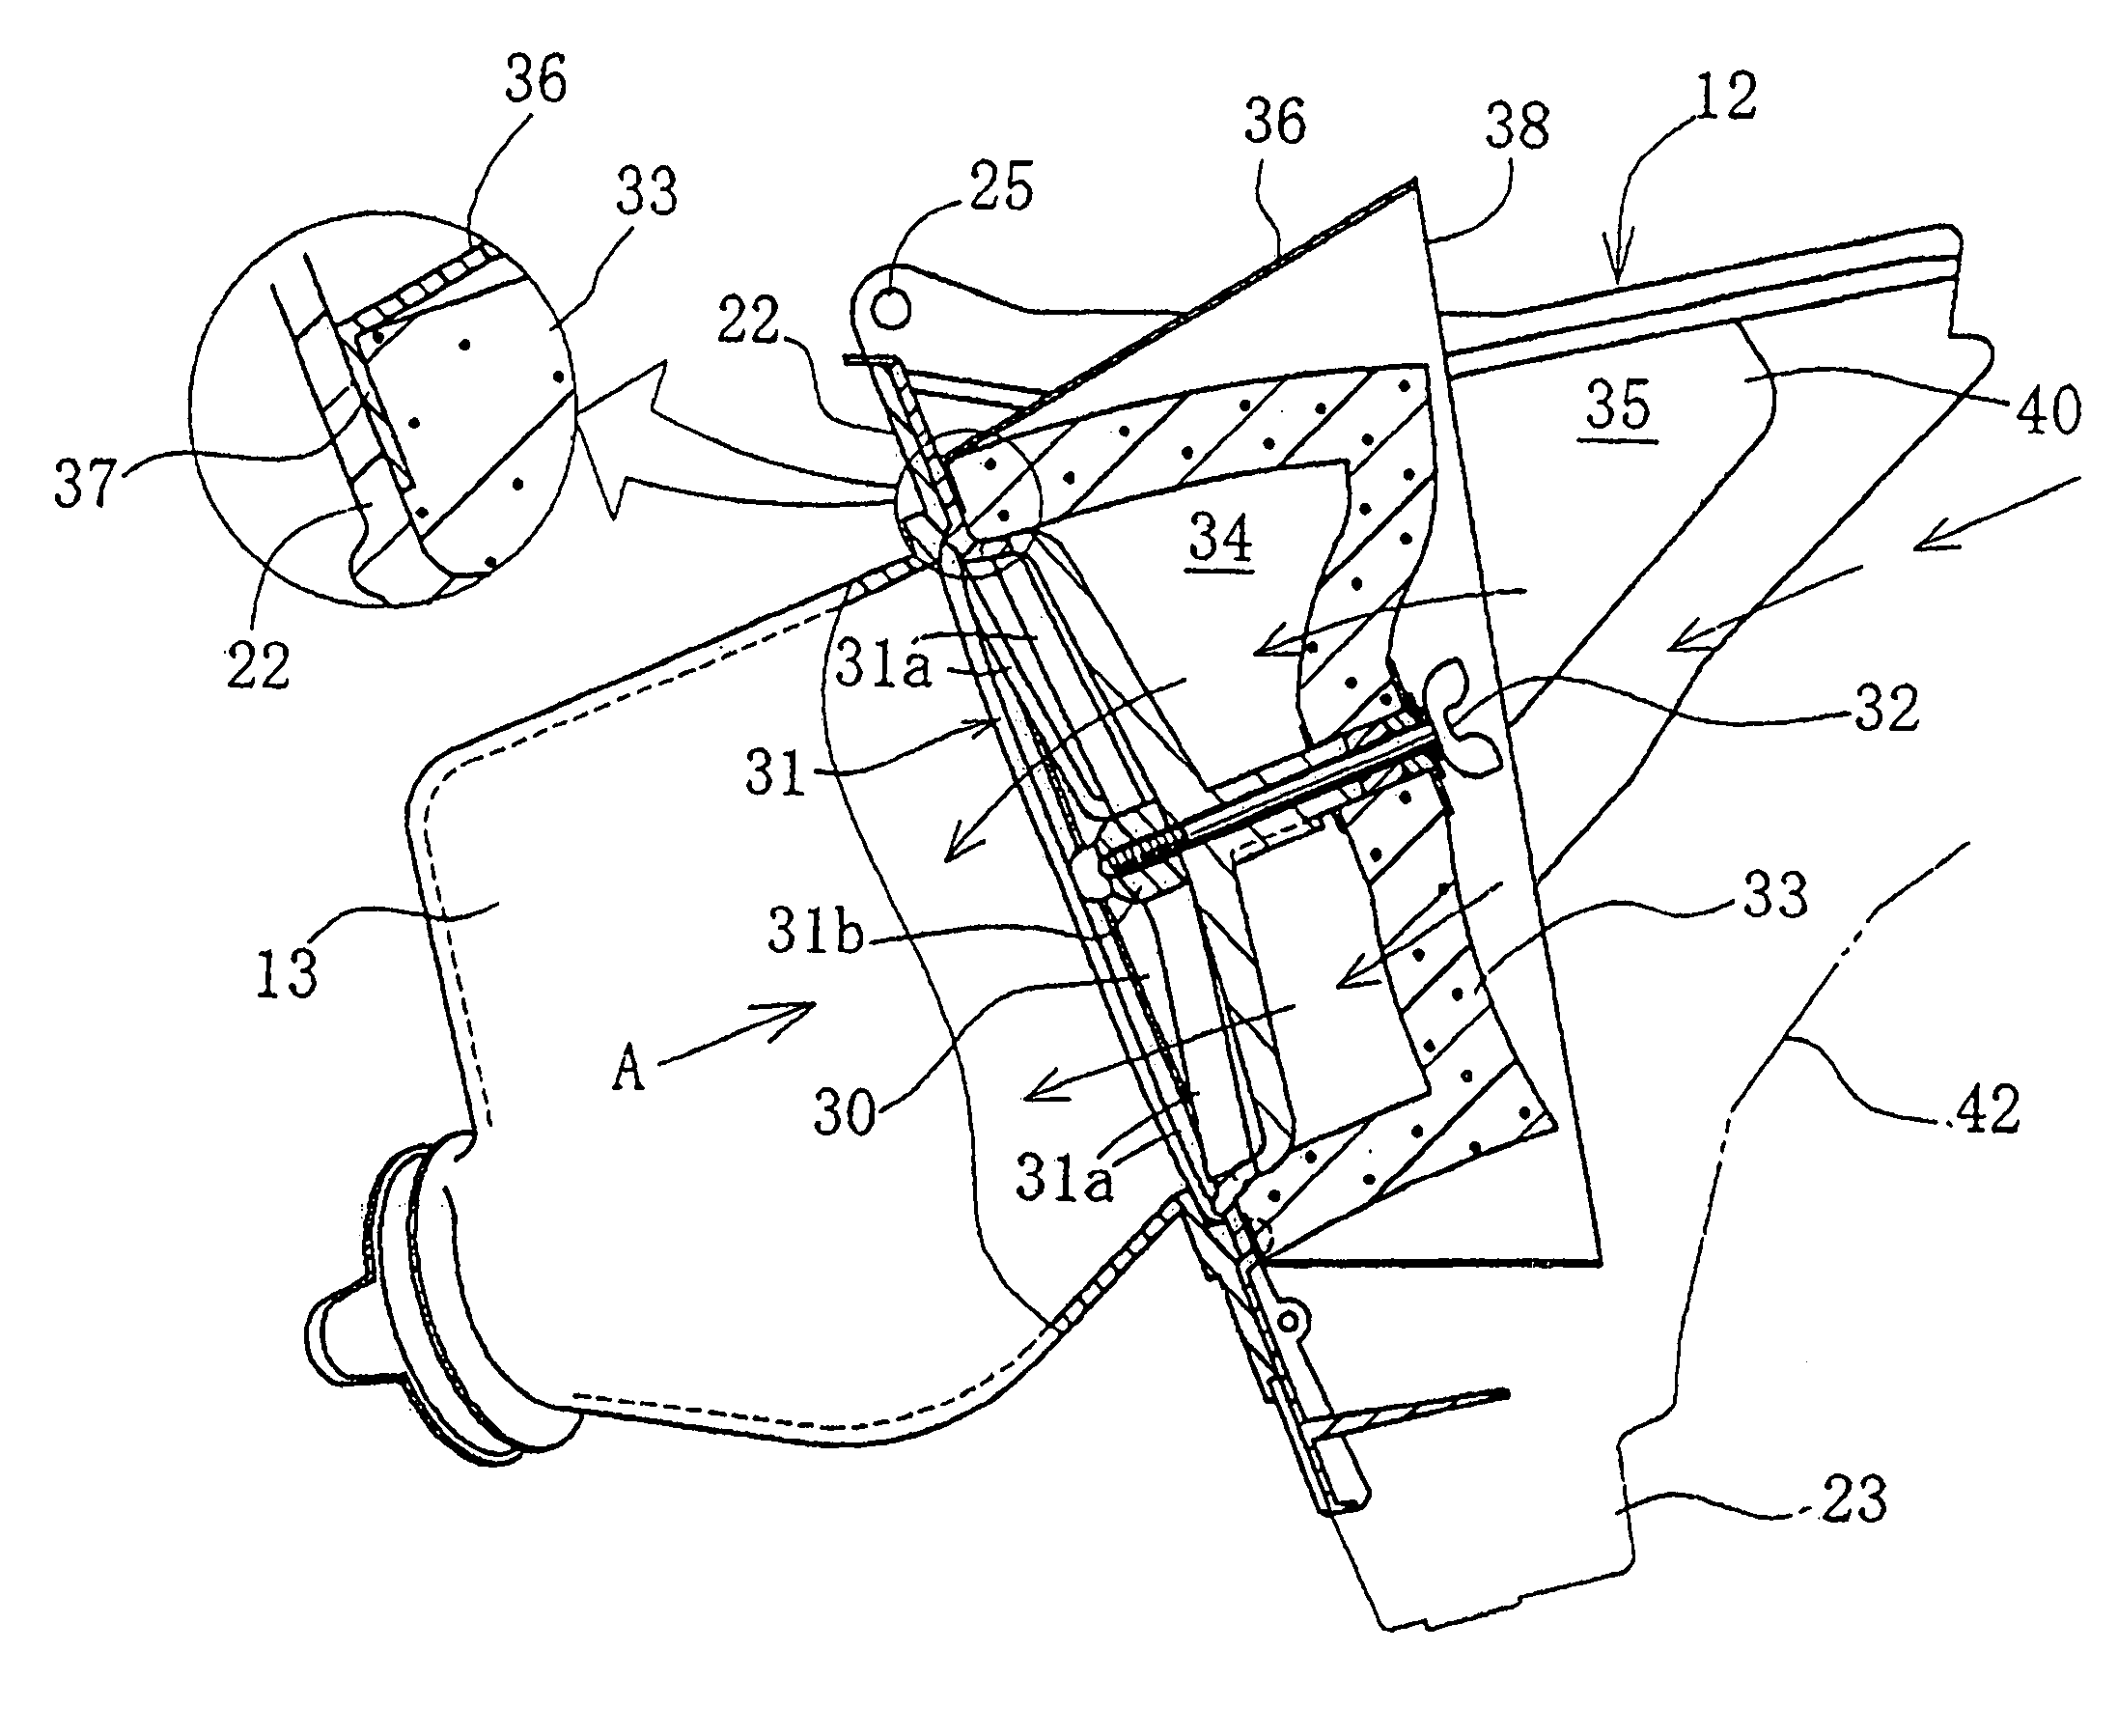 Air cleaner device for motorcycle